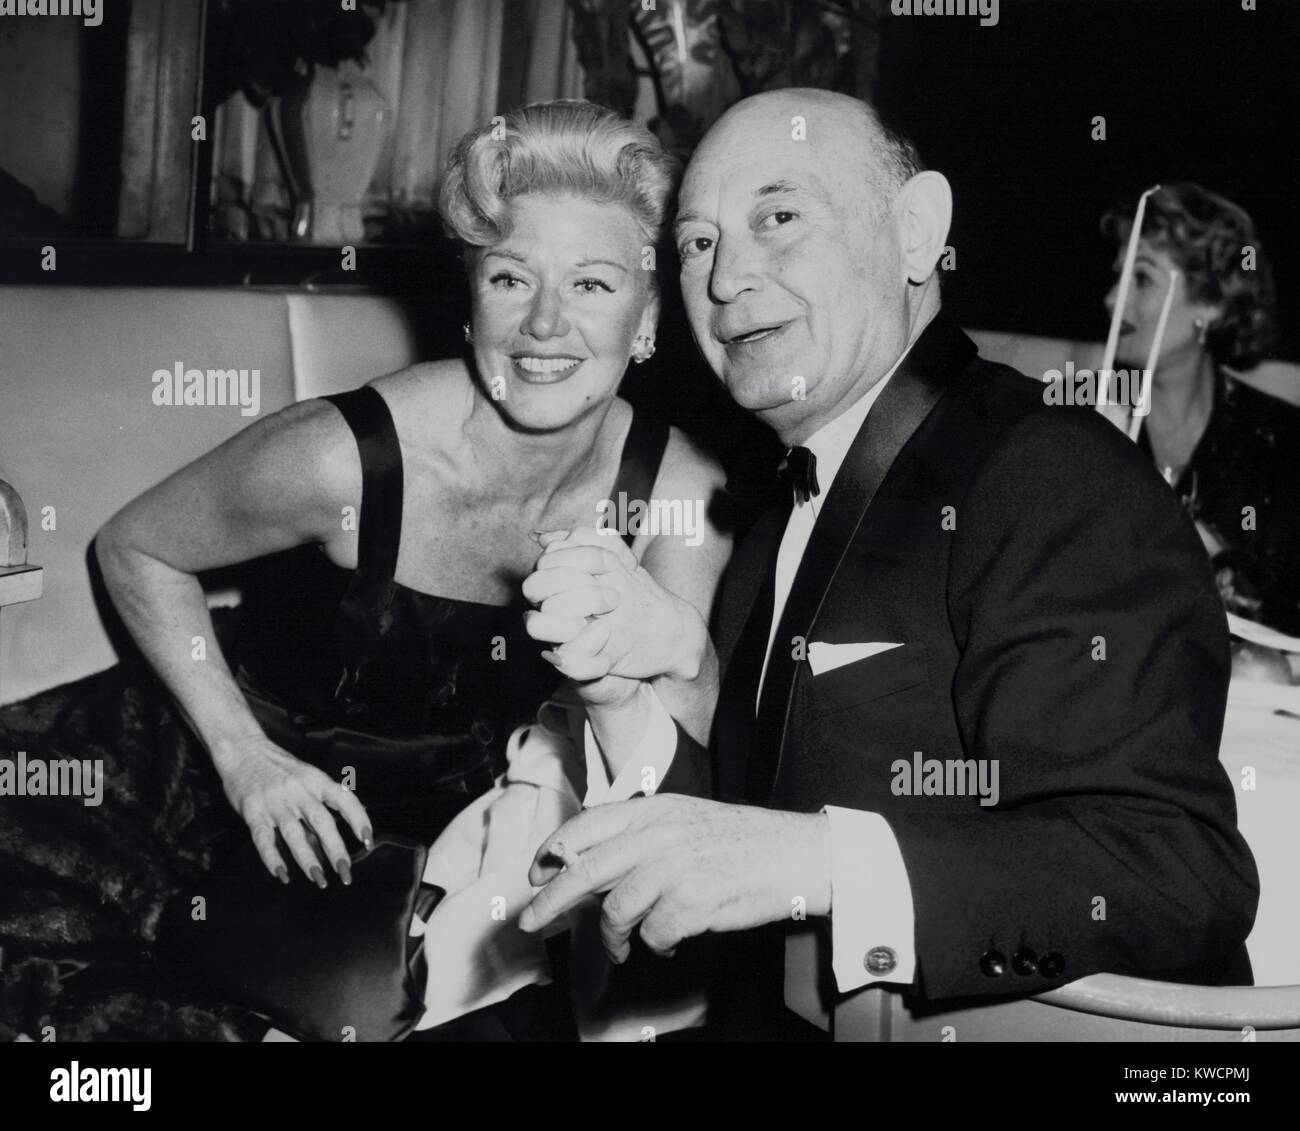 Boris Morros posing with Ginger Rogers at the Harwyn Club in NYC, Nov. 13, 1957. Morros, a Hollywood producer, was spied for the Soviets during World War 2, and became a double agent for the FBI in 1947. Morros was the co-author of the screenplay for the 1960 film, MAN ON A STRING, starring Ernest Borgnine and based on Morros espionage experiences. - (BSLOC 2015 1 21) Stock Photo